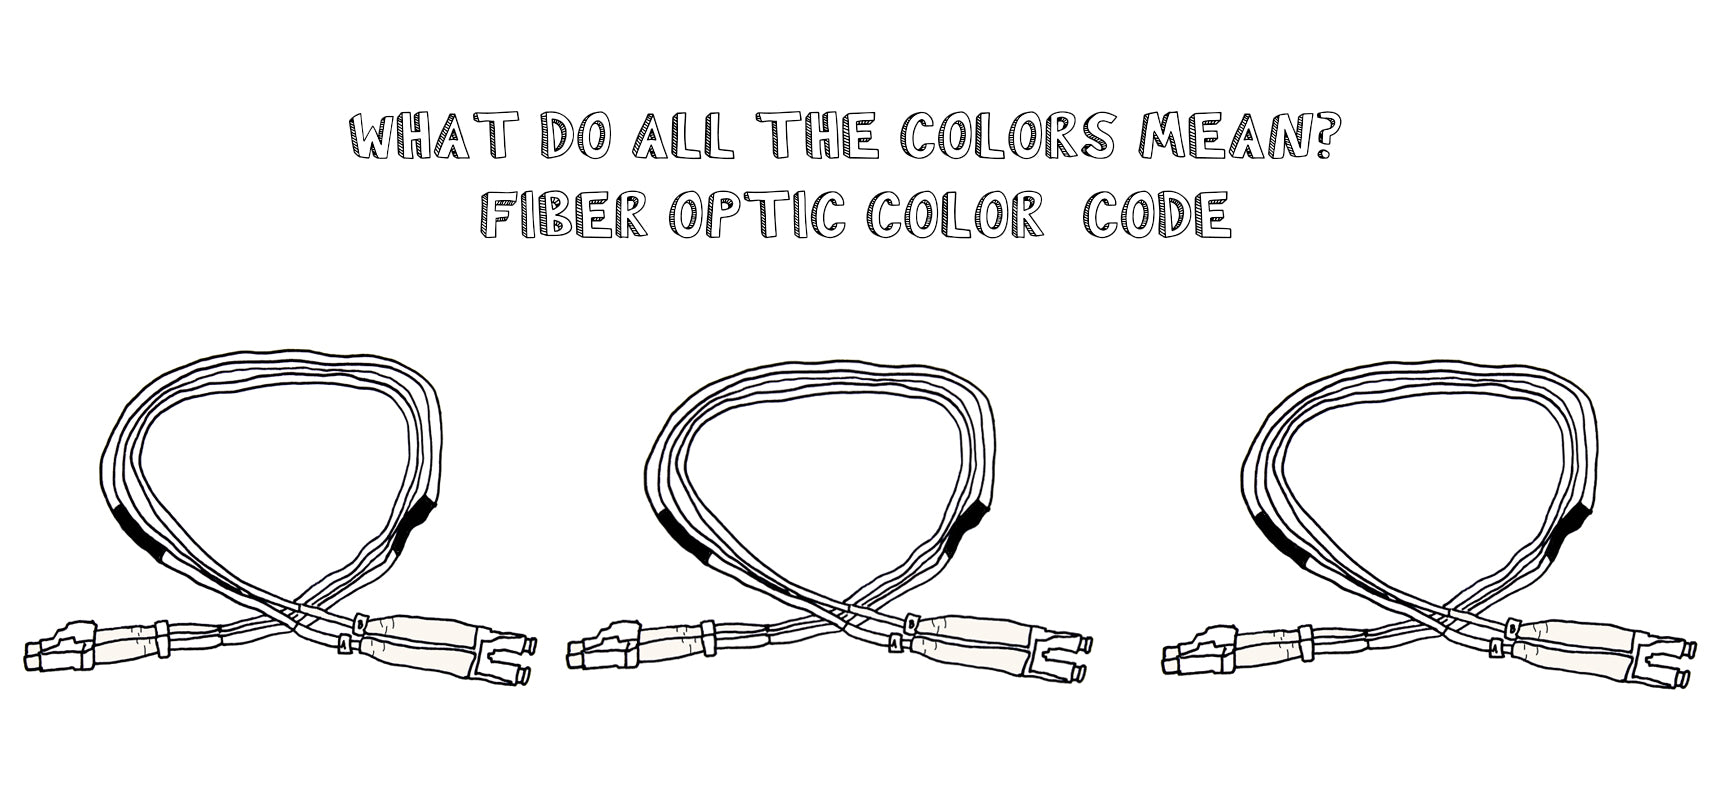 What Do All The Colors Mean? Fiber Optic Color Code